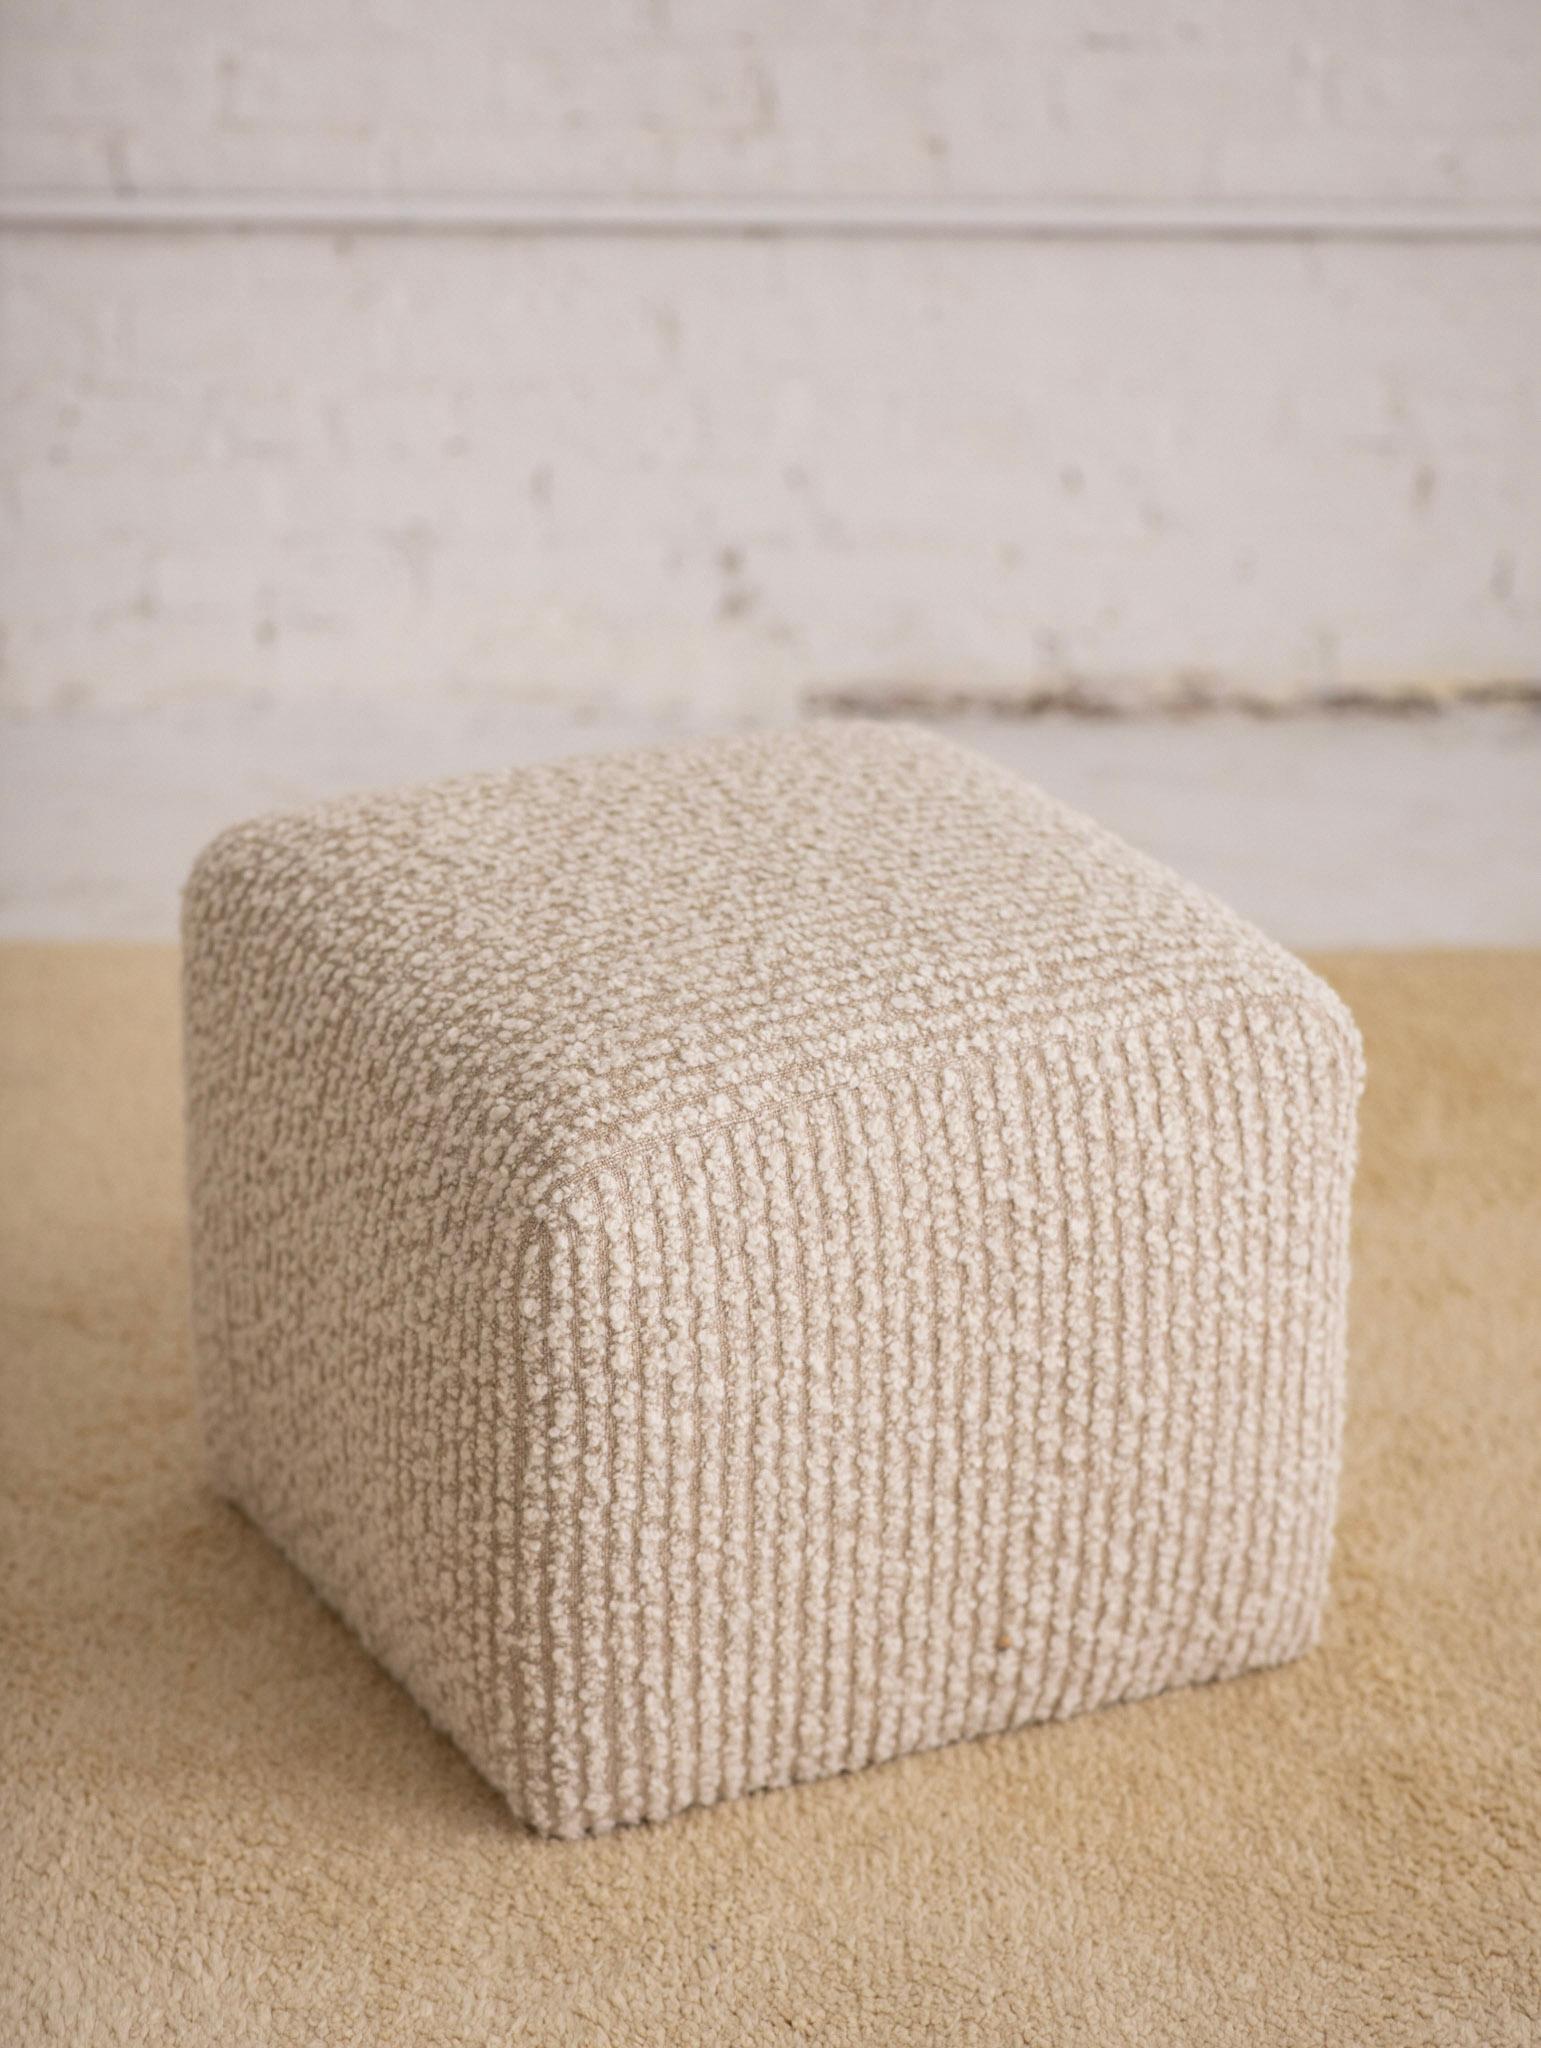 Cube ottoman newly reupholstered in a high quality, high pile wool boucle. Pair available, sold seperately.